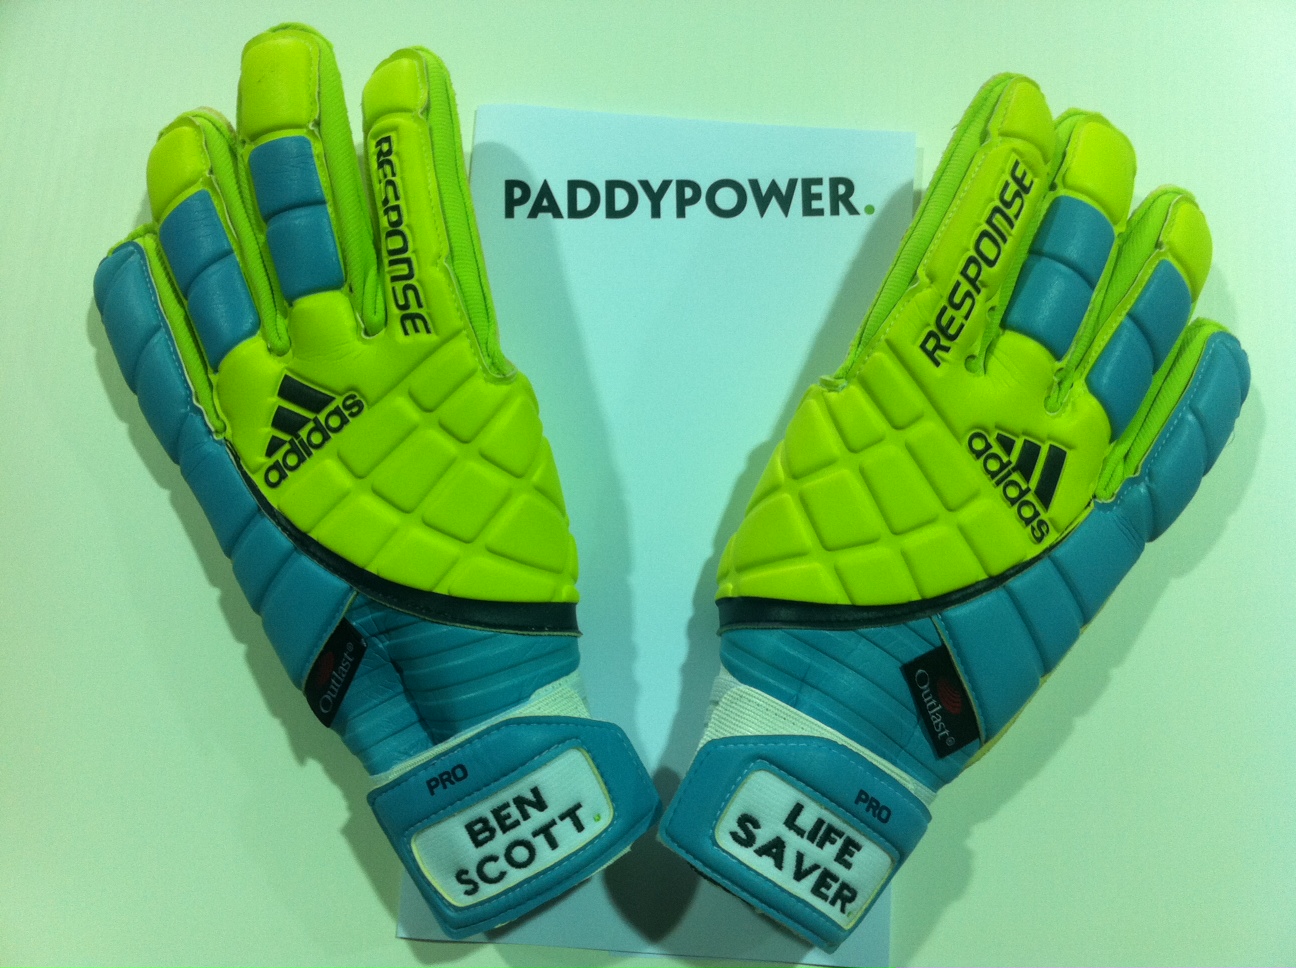 Goalkeeper gloves – Ben Scott » Who Ate all the Pies1296 x 968